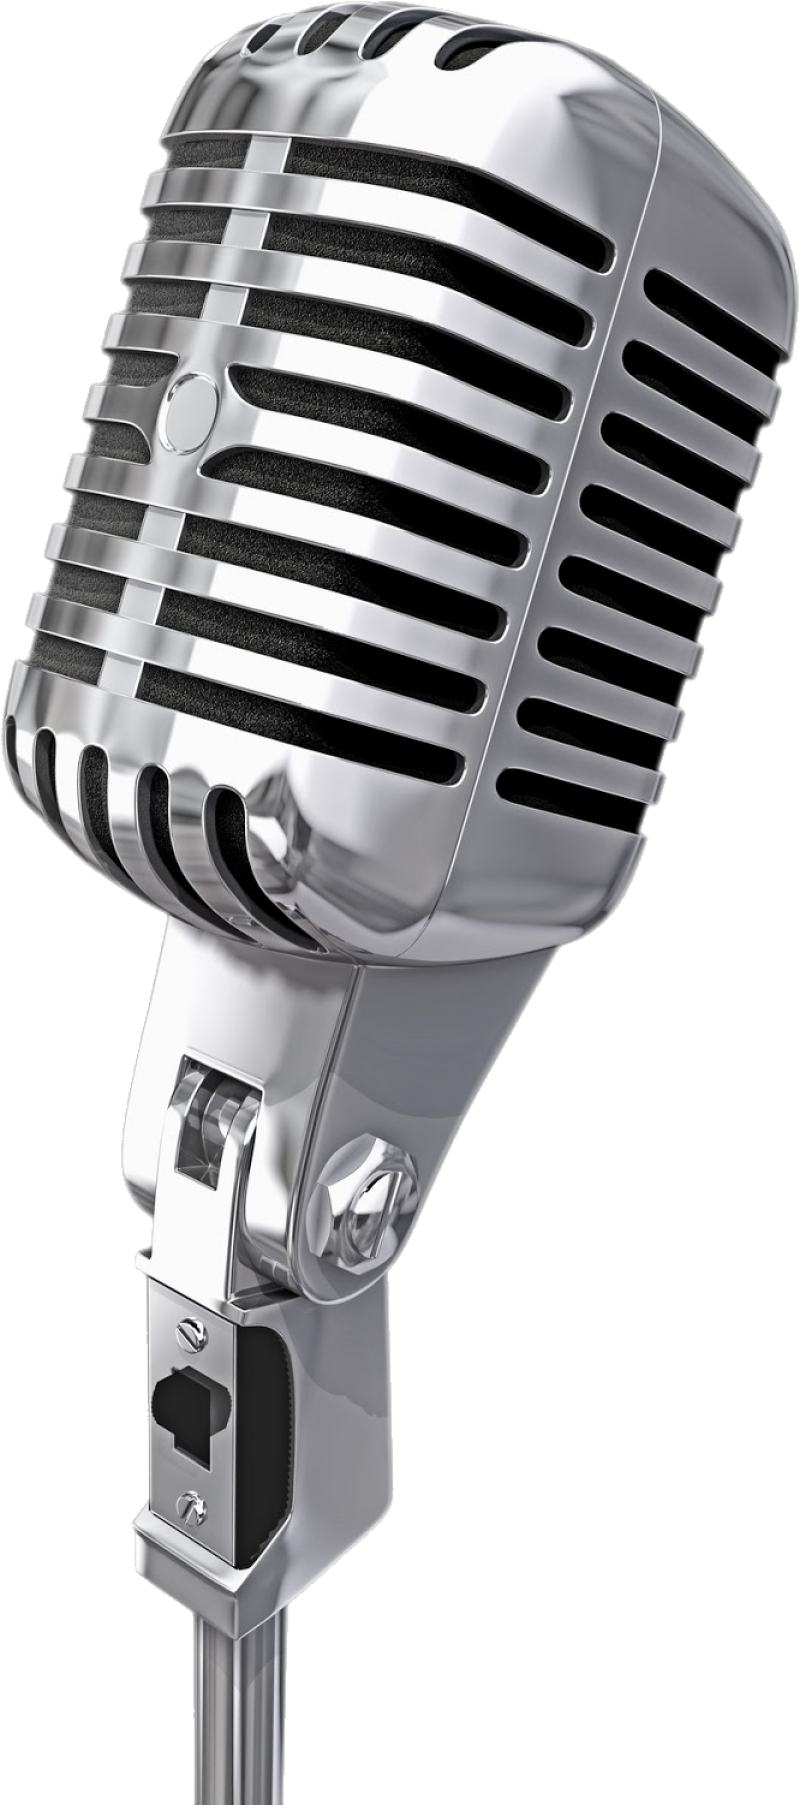 Silver HQ Microphone PNG Image - PurePNG | Free transparent CC0 PNG